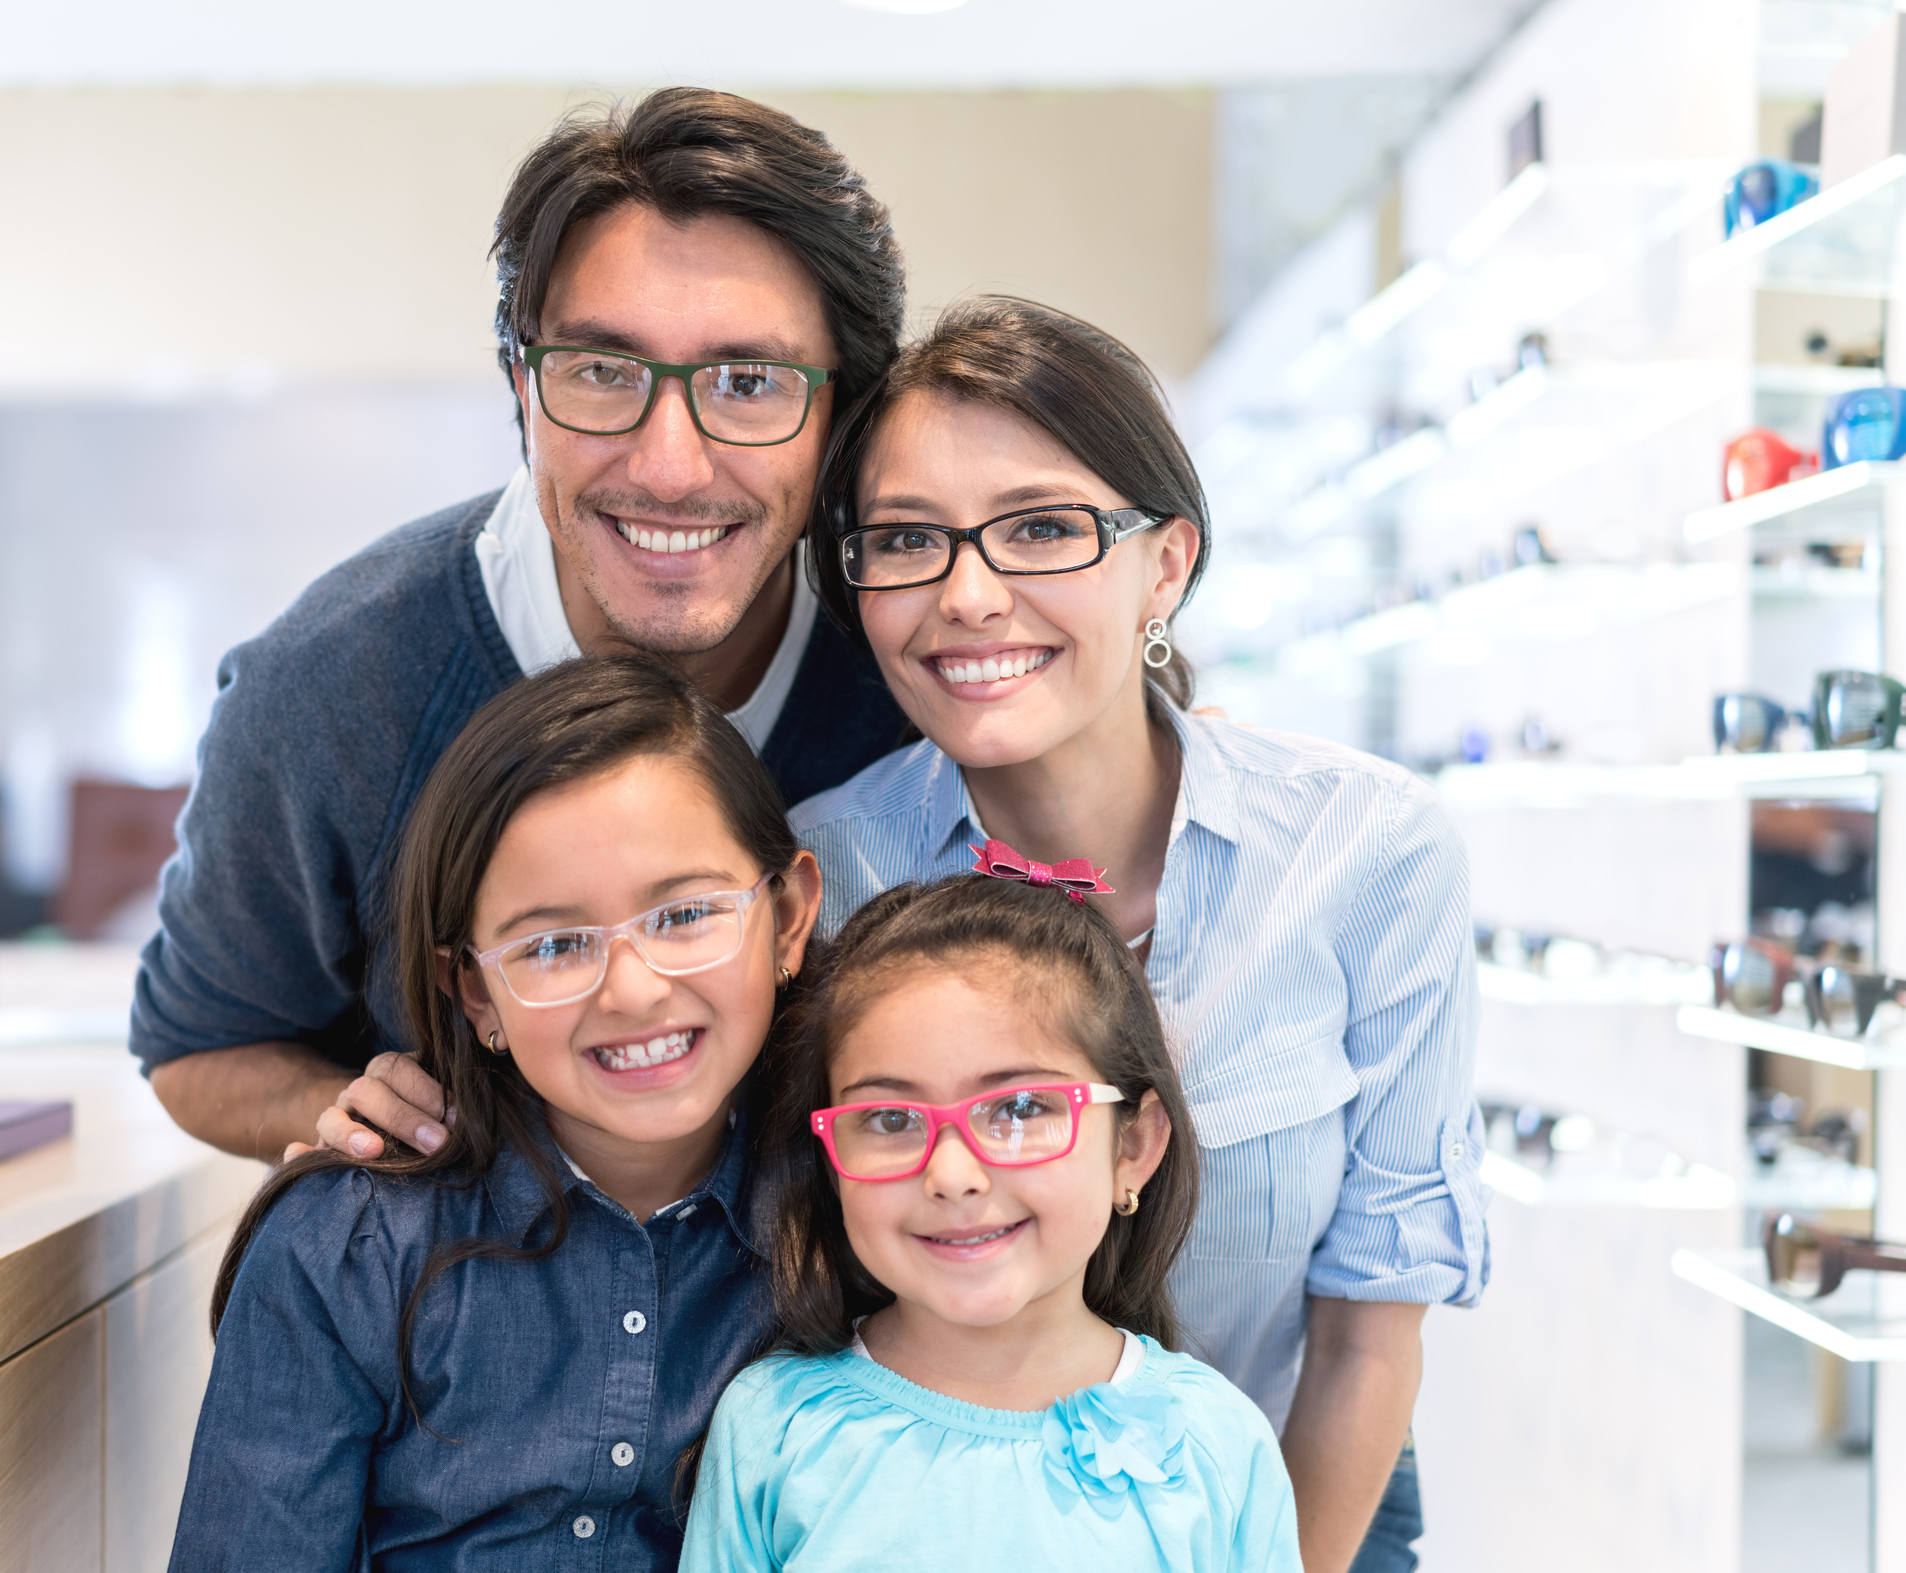 Eye care durham - Family buying glasses at the optician's shop